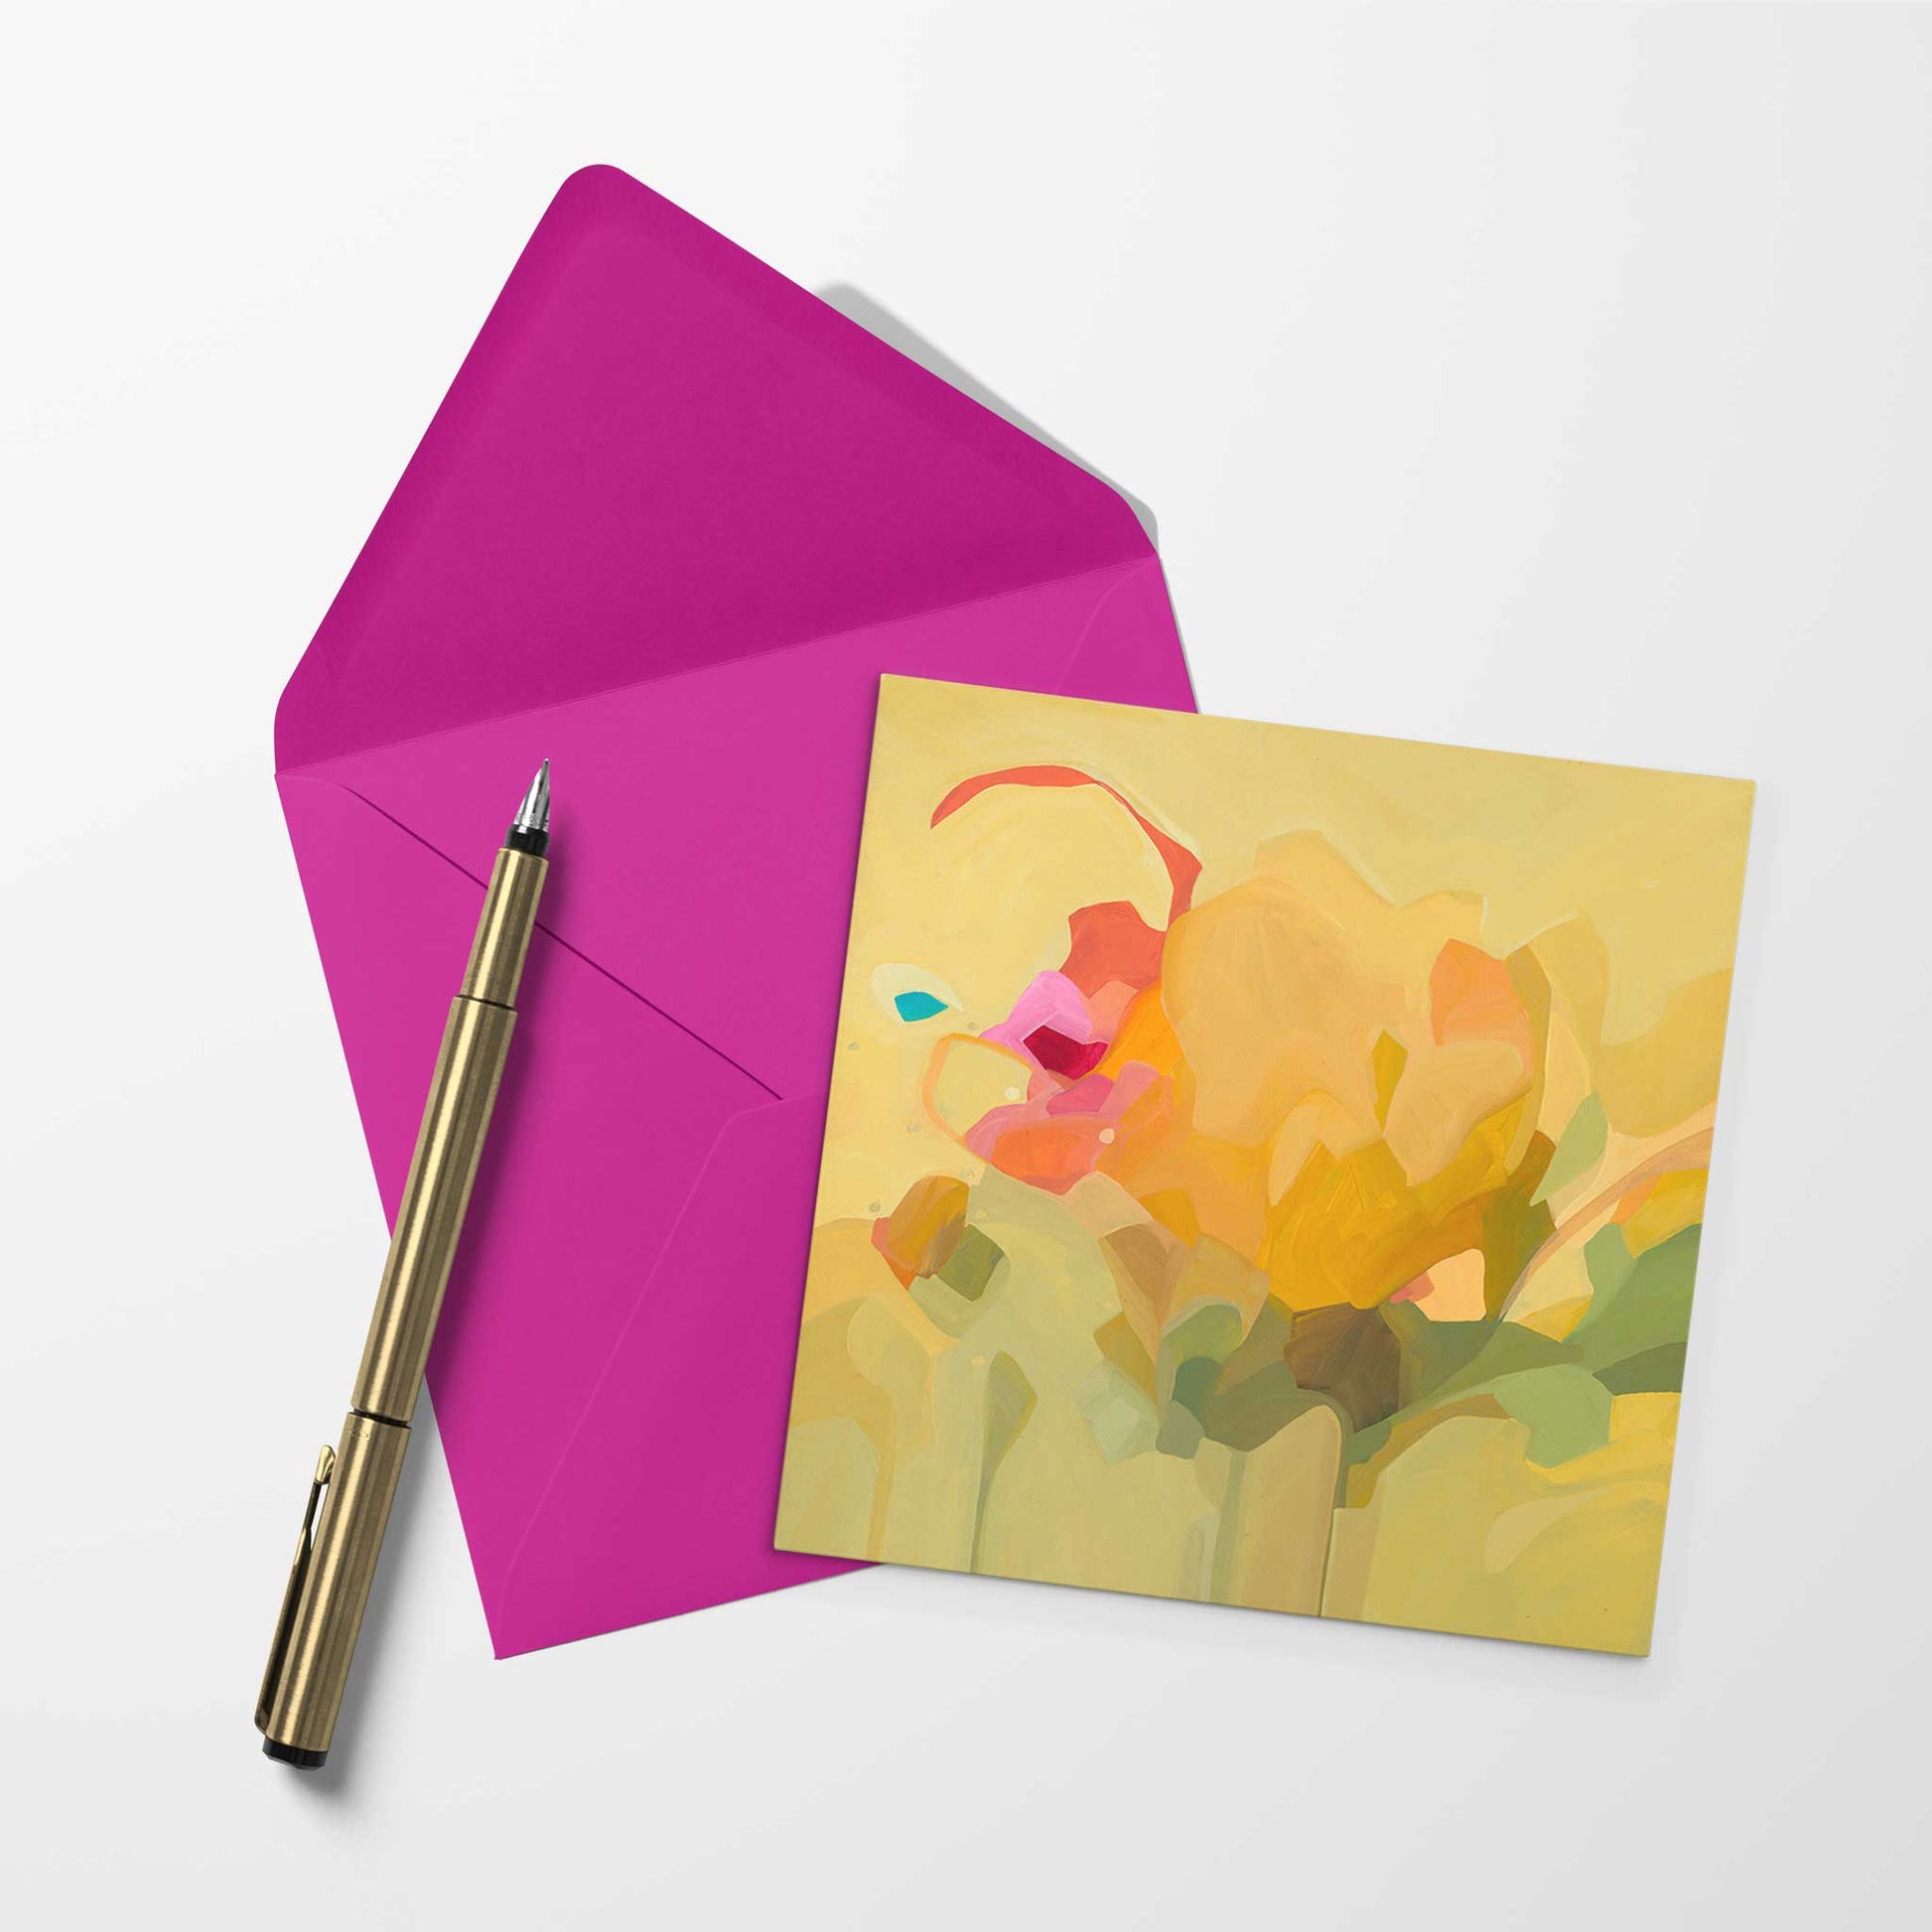 blank art card with lemon yellow abstract artwork and hot pink envelope